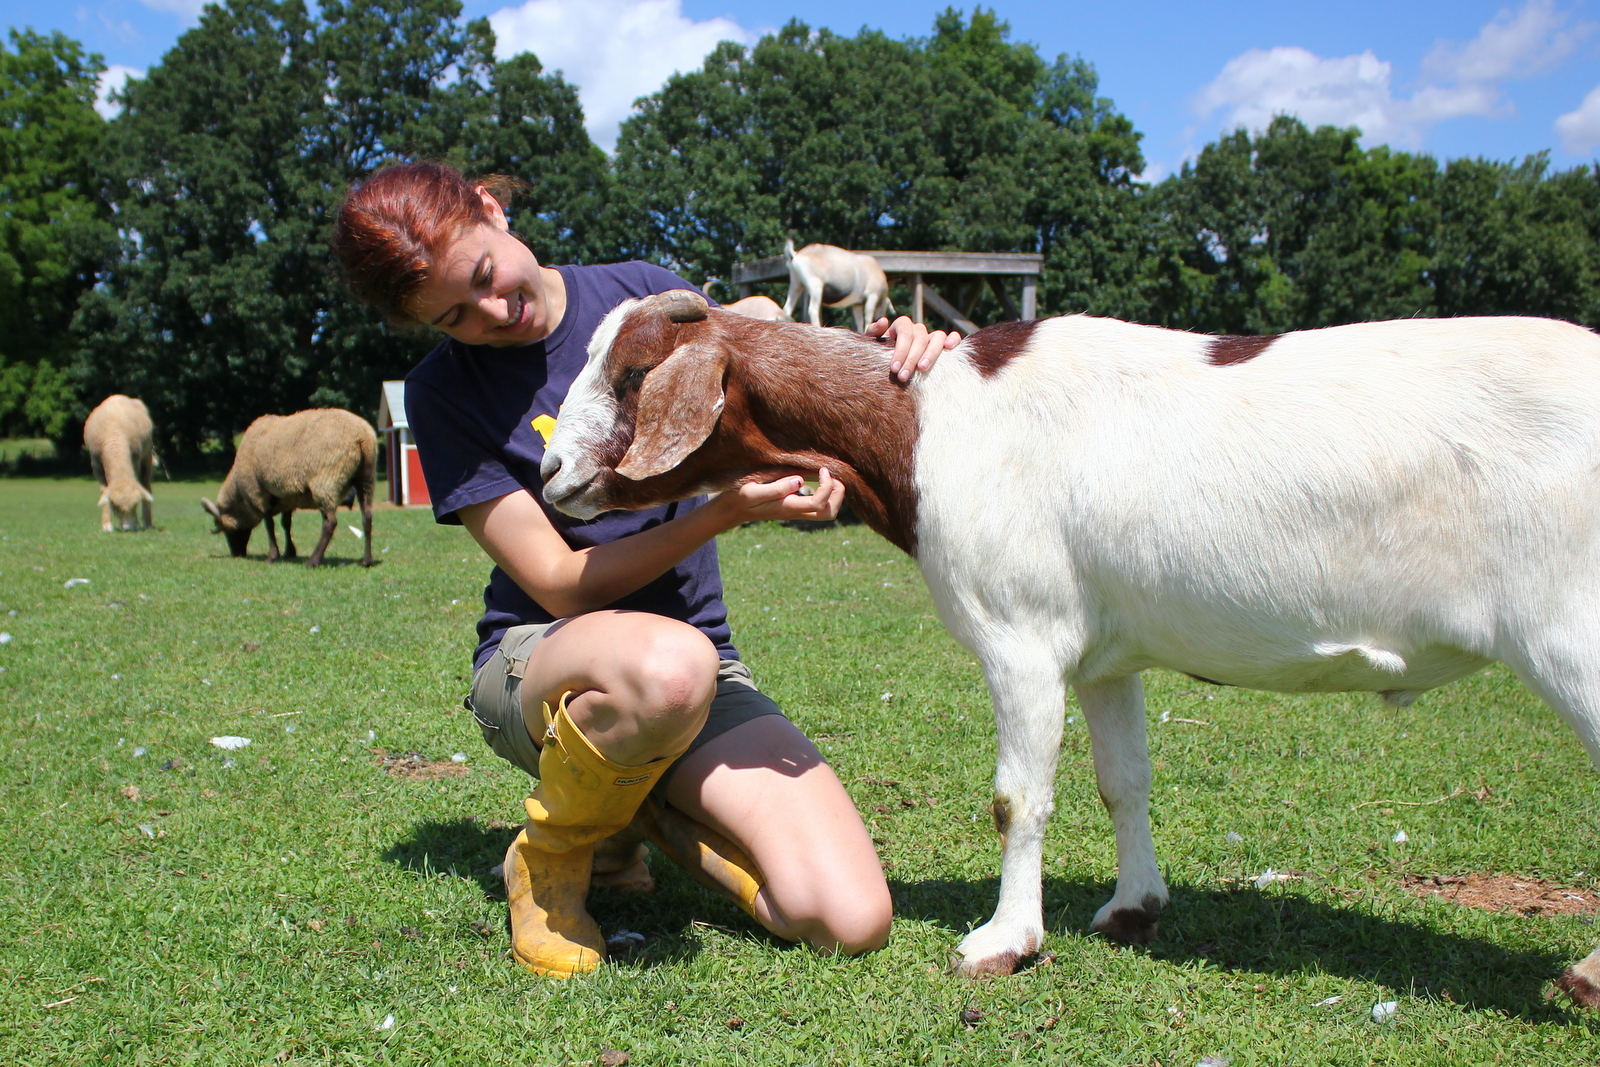 Life Lessons I’ve Learned Volunteering at an Animal Sanctuary